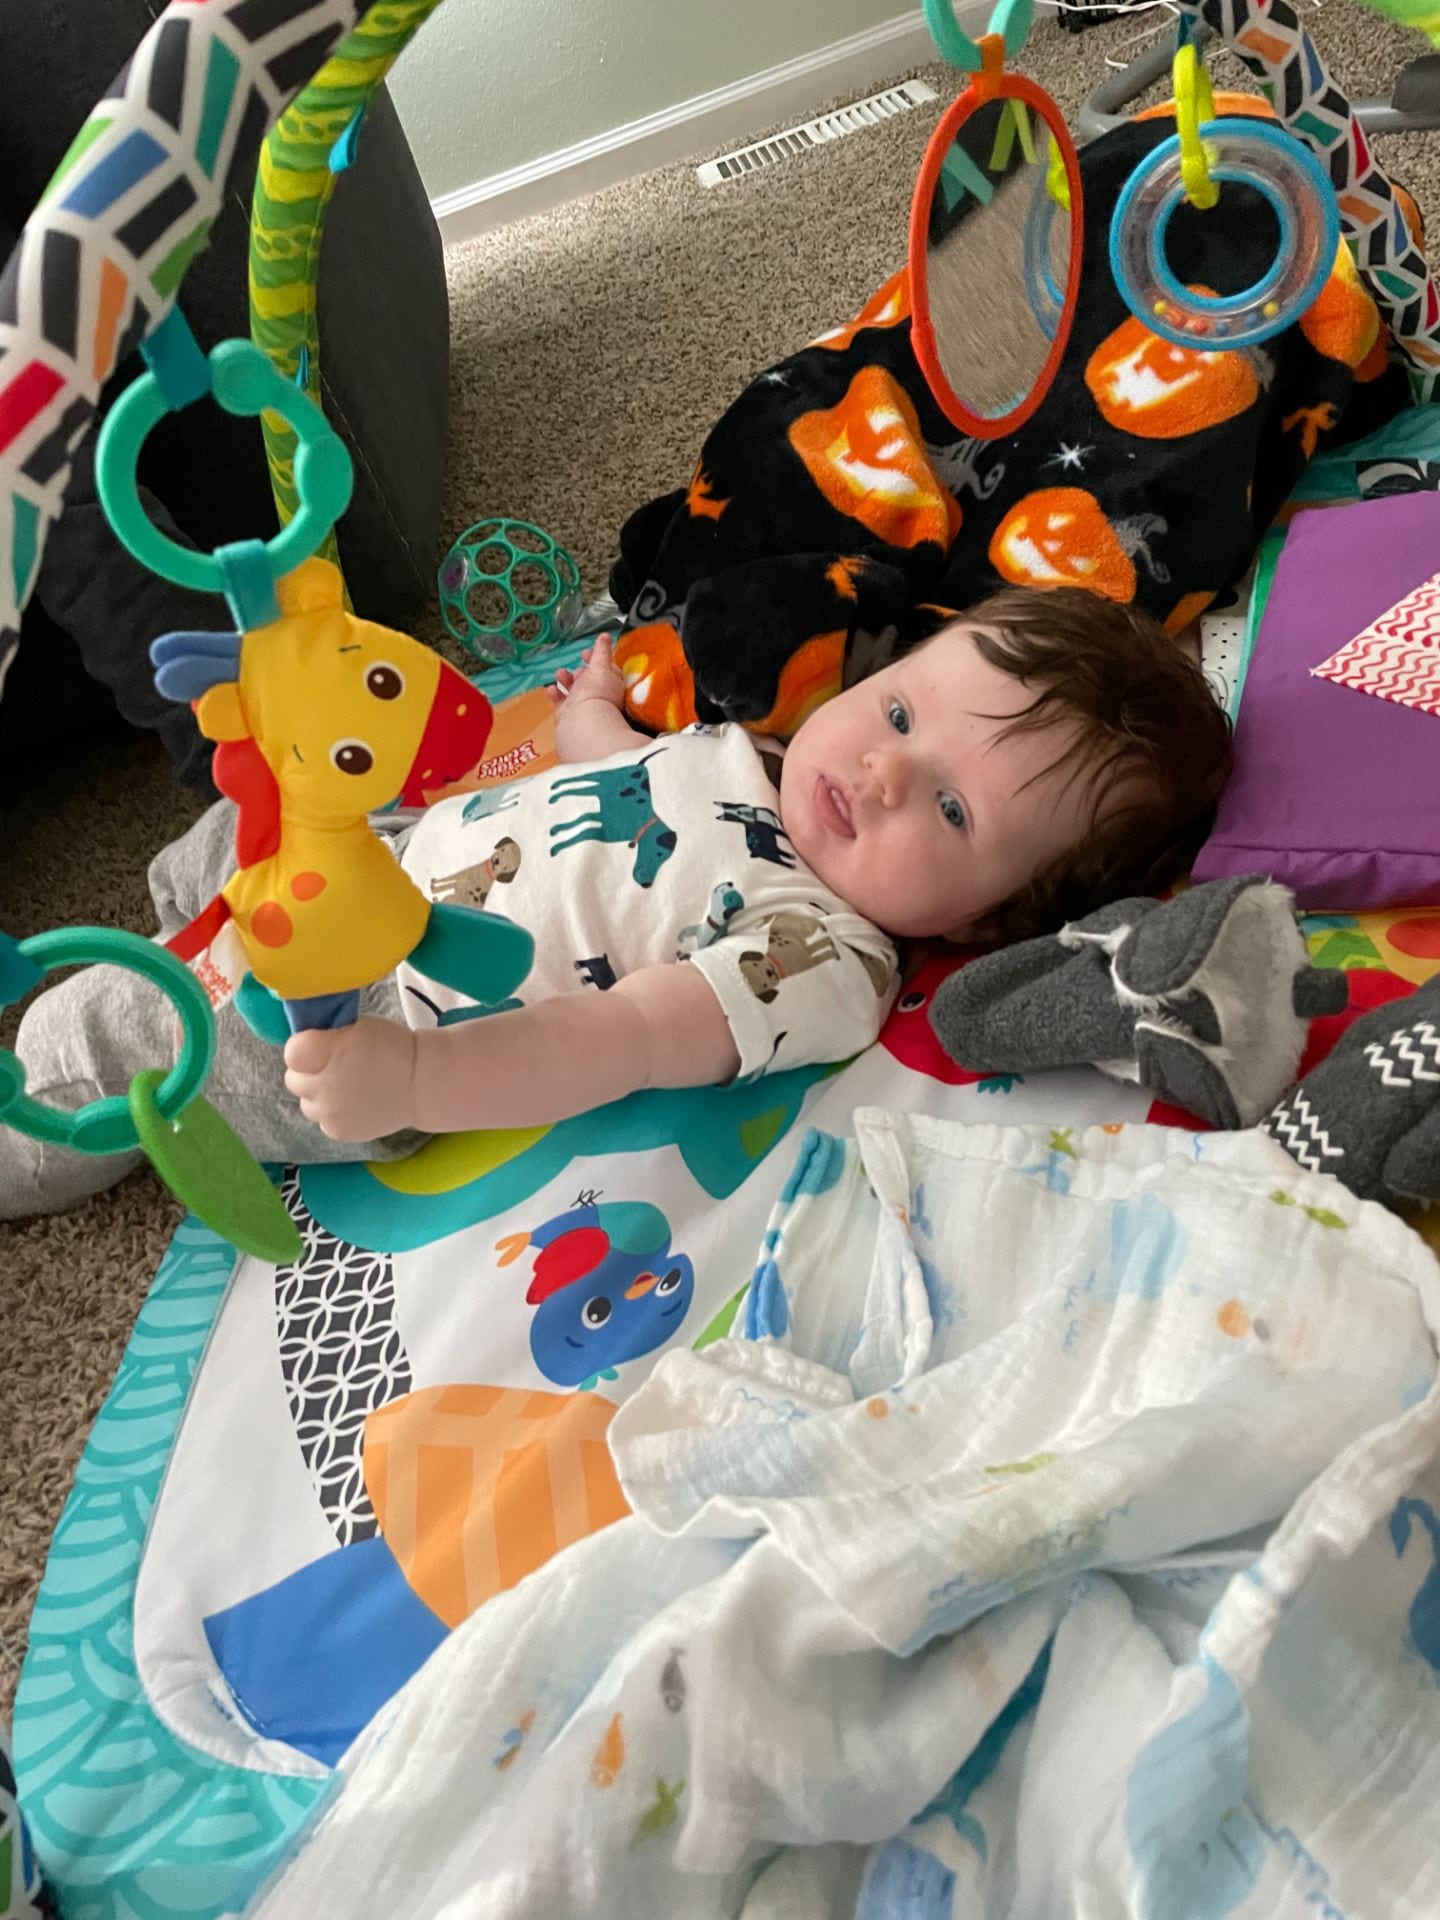 A 3 month old is on a play mat with foam arches that toys hang from. The baby is grasping a cartoon plush giraffe that's hanging from a foam arch